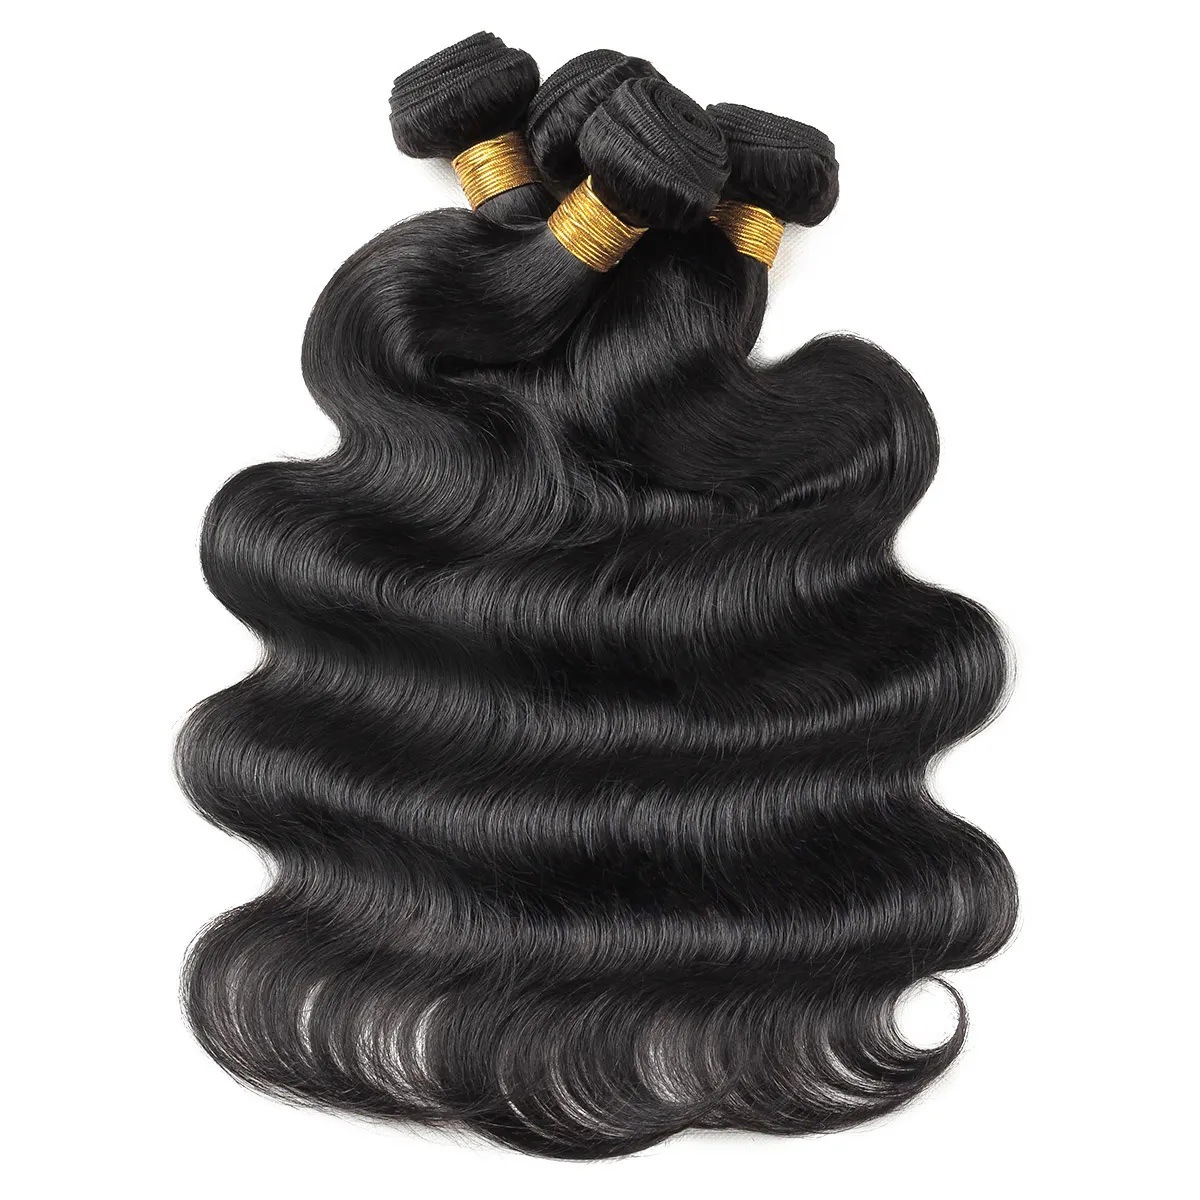 Ishow Brazilian Virgin Hair Extensions Water Straight 10 PCS Peruvian Body Wave Loose Human Hair Bundles Wefts for Women Malaysian All Ages 8-28inch Natural Black